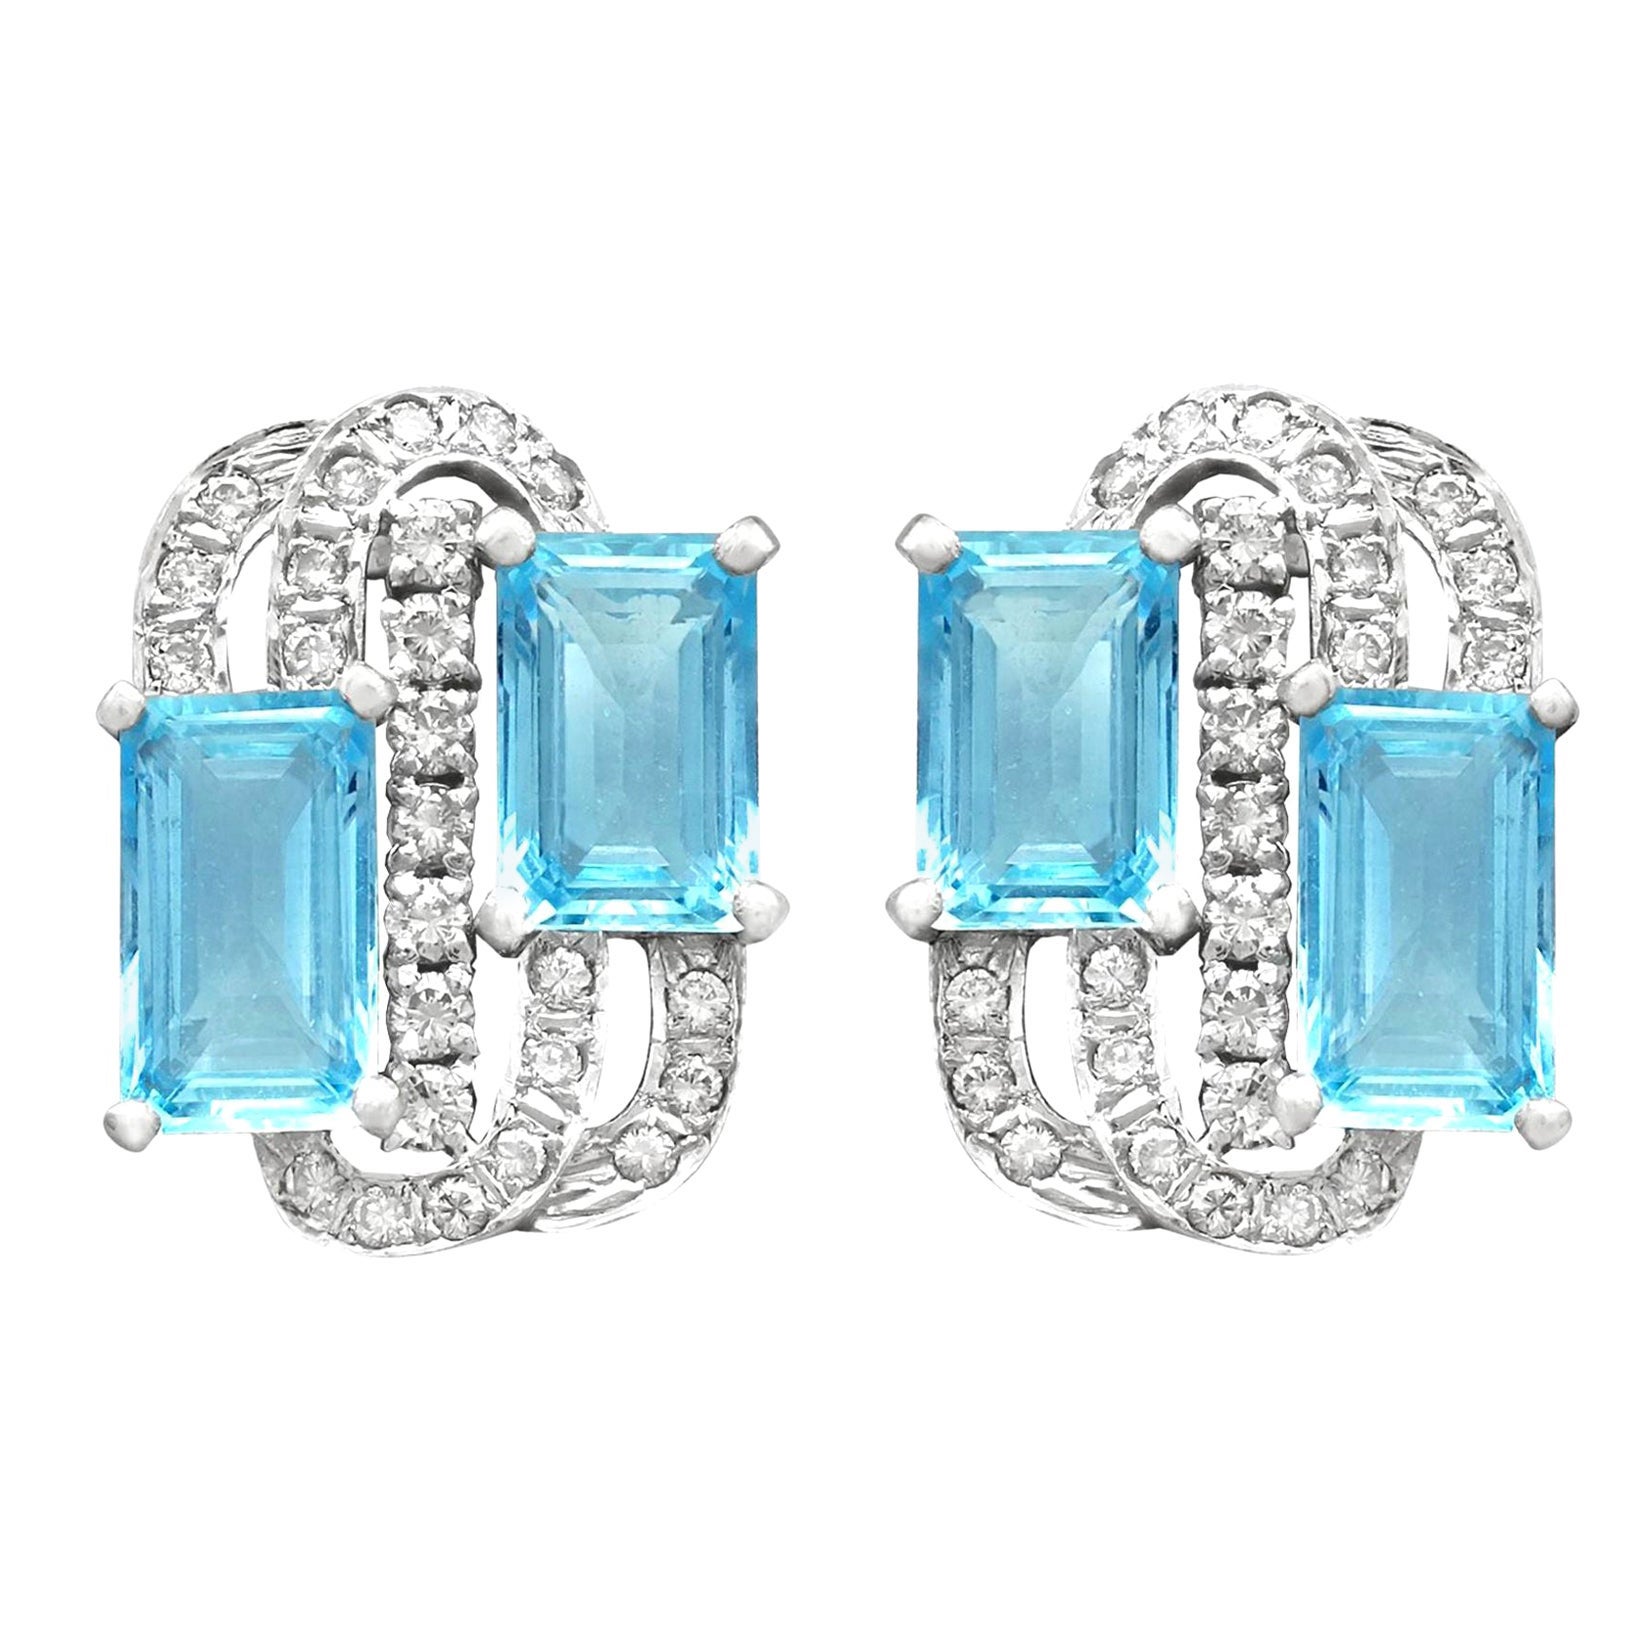 Vintage 7.72 Carat Aquamarine and 1.18 Carat Diamond White Gold Earrings For Sale